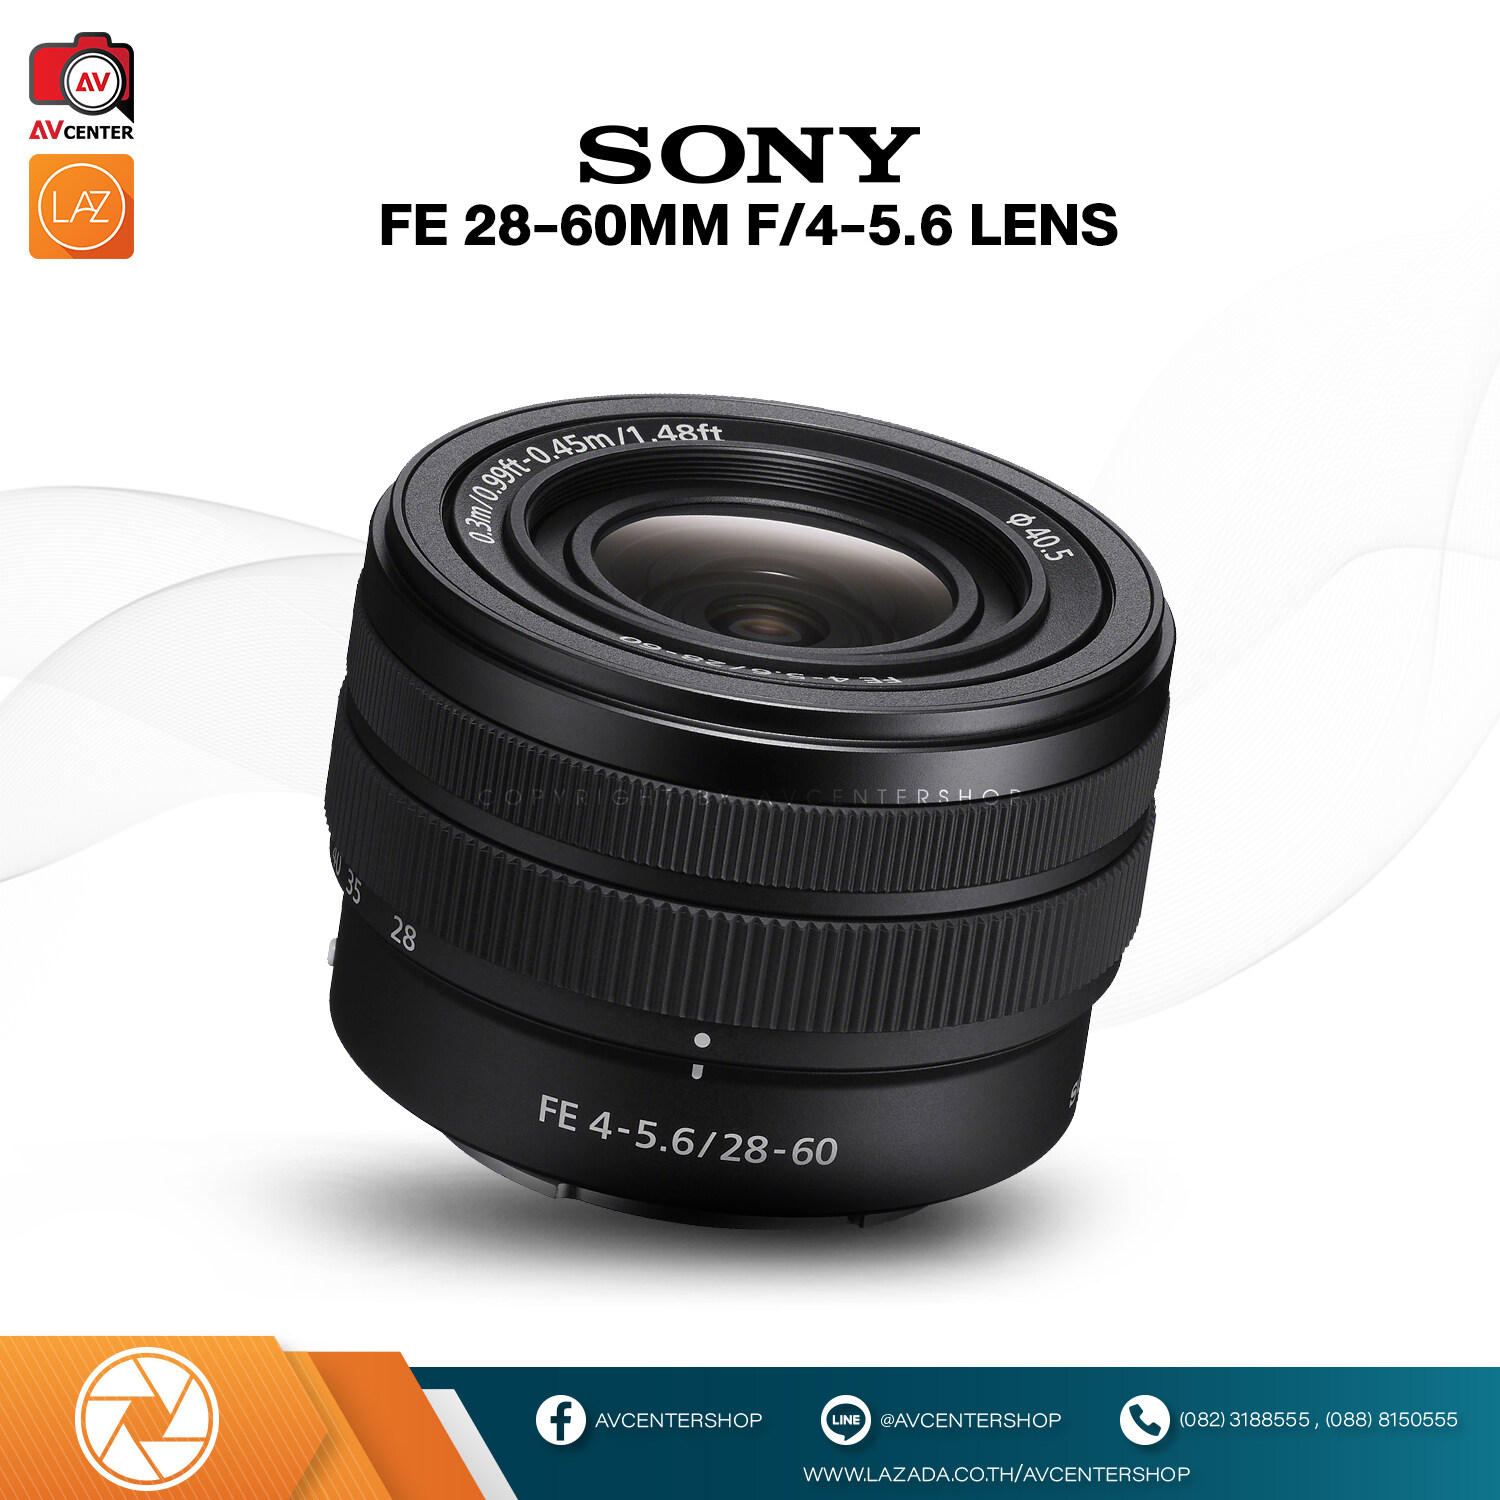 Sony Lens FE 28-60 mm F4-5.6 [รับประกัน 1 ปี by AVcentershop]